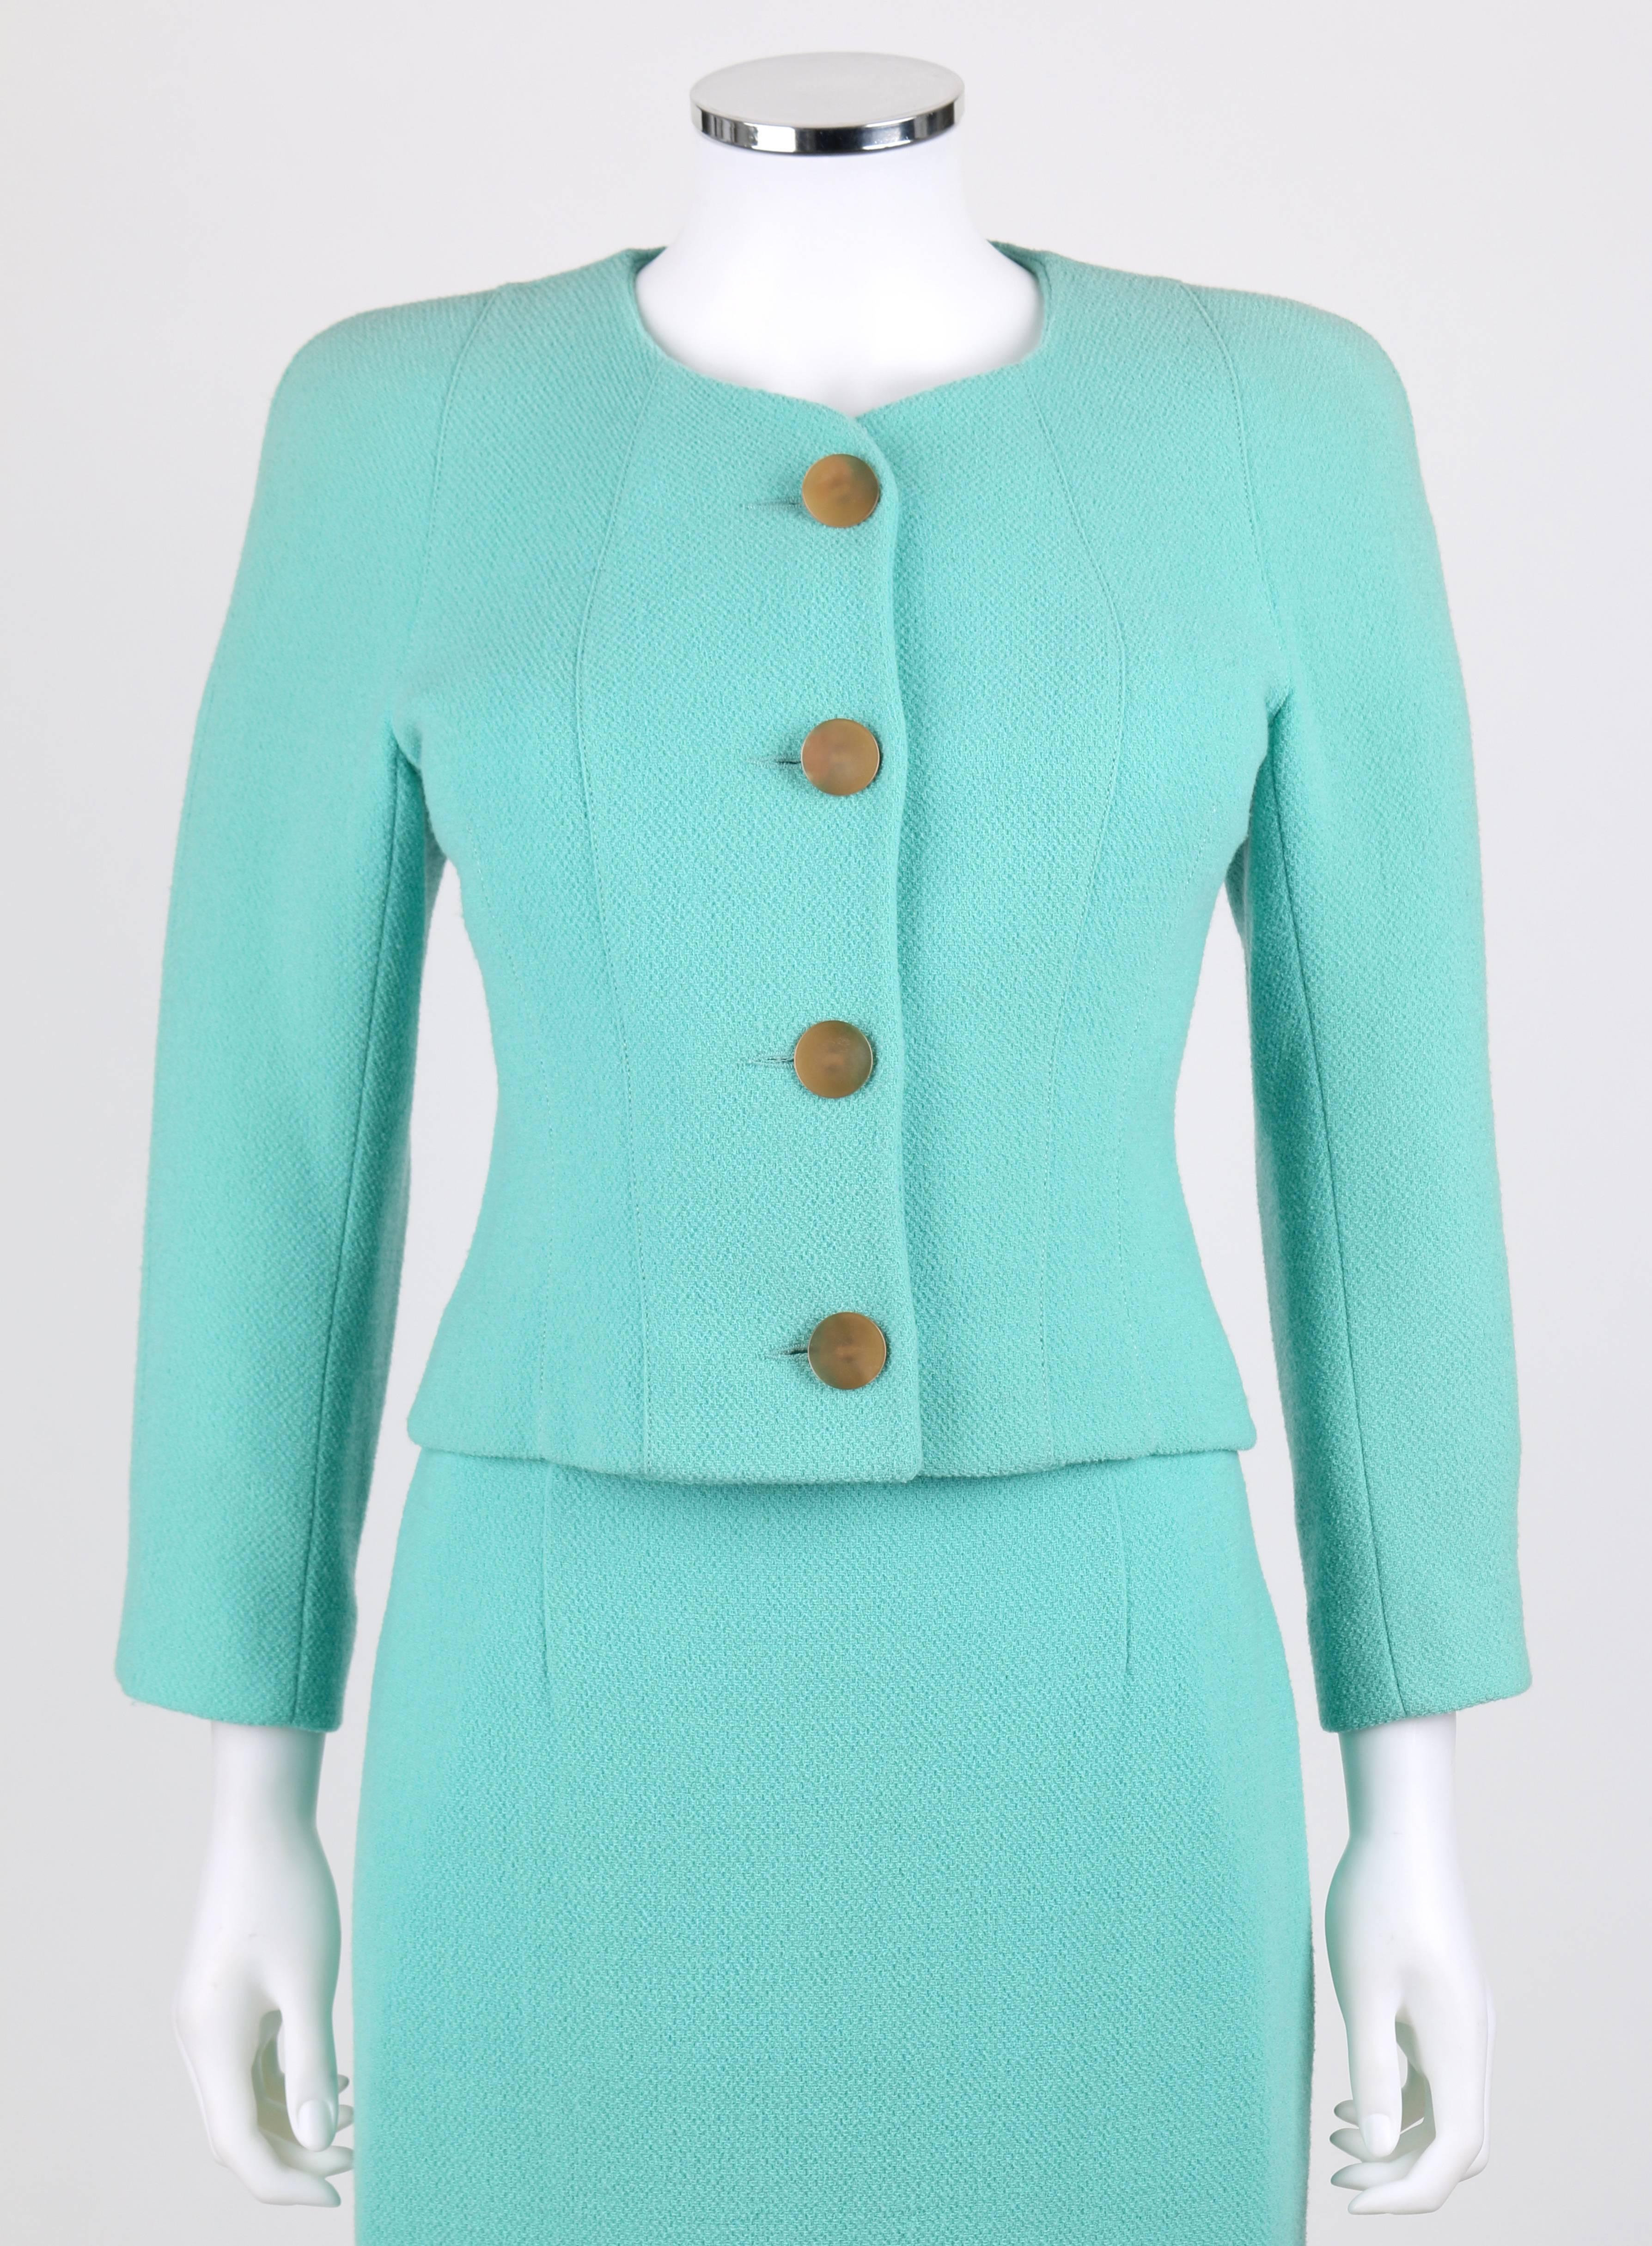 Balenciaga Le Dix (designed by Michel Goma) two piece 1960's inspired sea foam green wool suit set from the Autumn / Winter 1991 collection. Blazer has high crew neck. Long sleeves. Four center front large pearlized tan button closures. Stylized